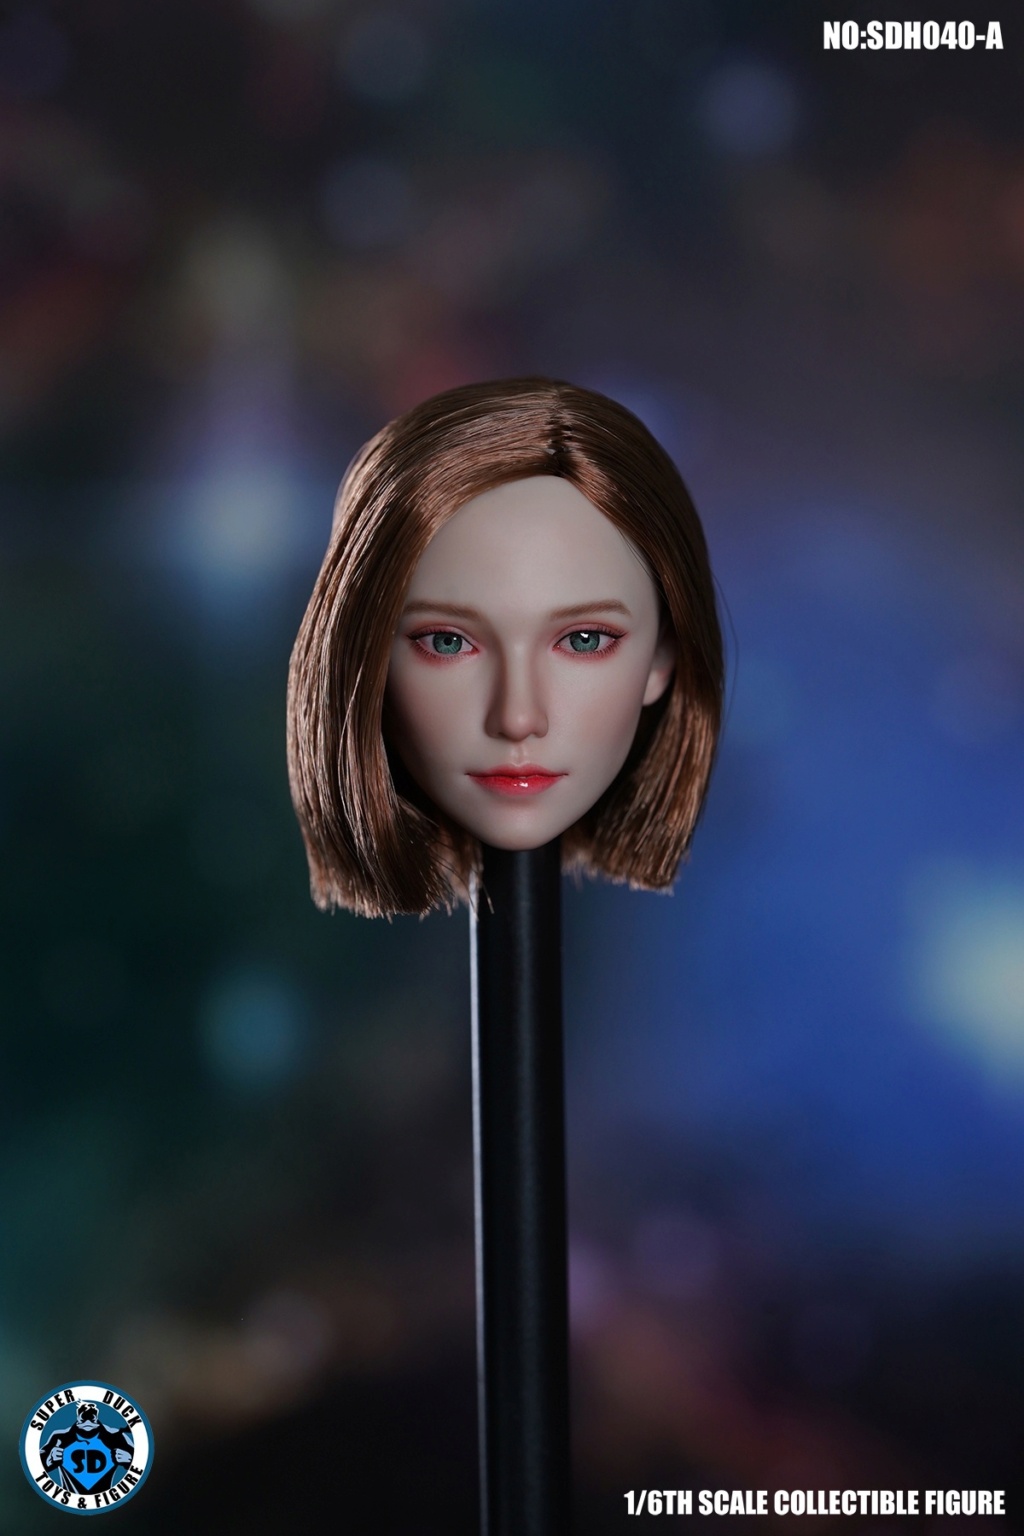 NEW PRODUCT: Super Duck: 1/6 SDH040 Mixed-Blood Female Head Sculpture - AB C. D Four Styles 15581810